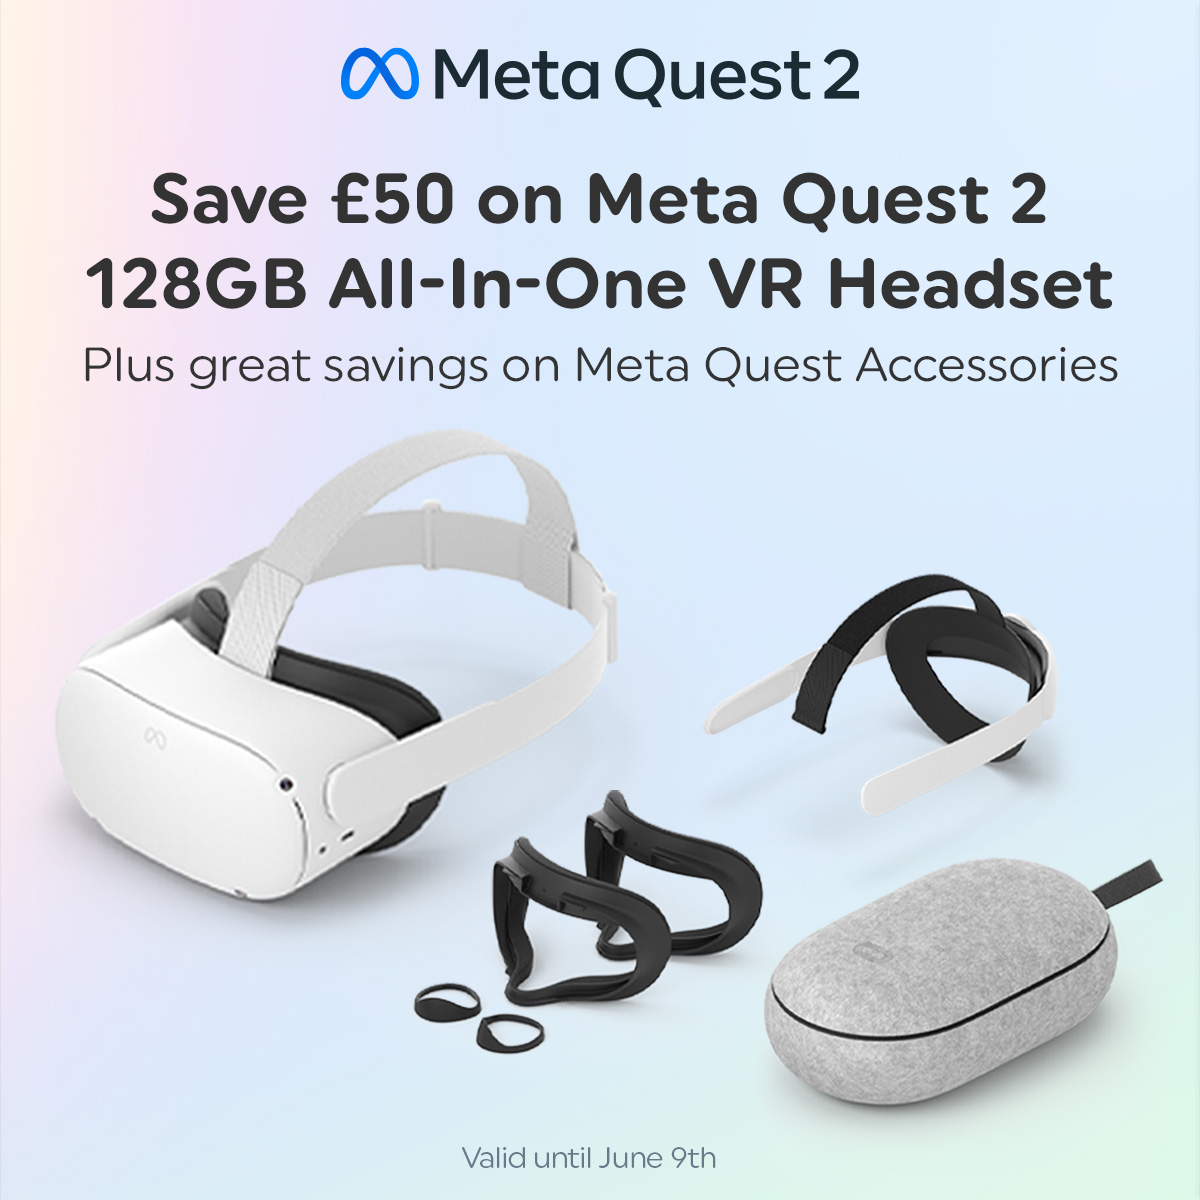 Save £50 on the Meta Quest 2 128GB All-In-One VR Headset! 🎮 Only £199.99! ✅ Meta Quest is for ages 13+ Shop now at Smyths Toys 👉 tinyurl.com/2vcyue5e